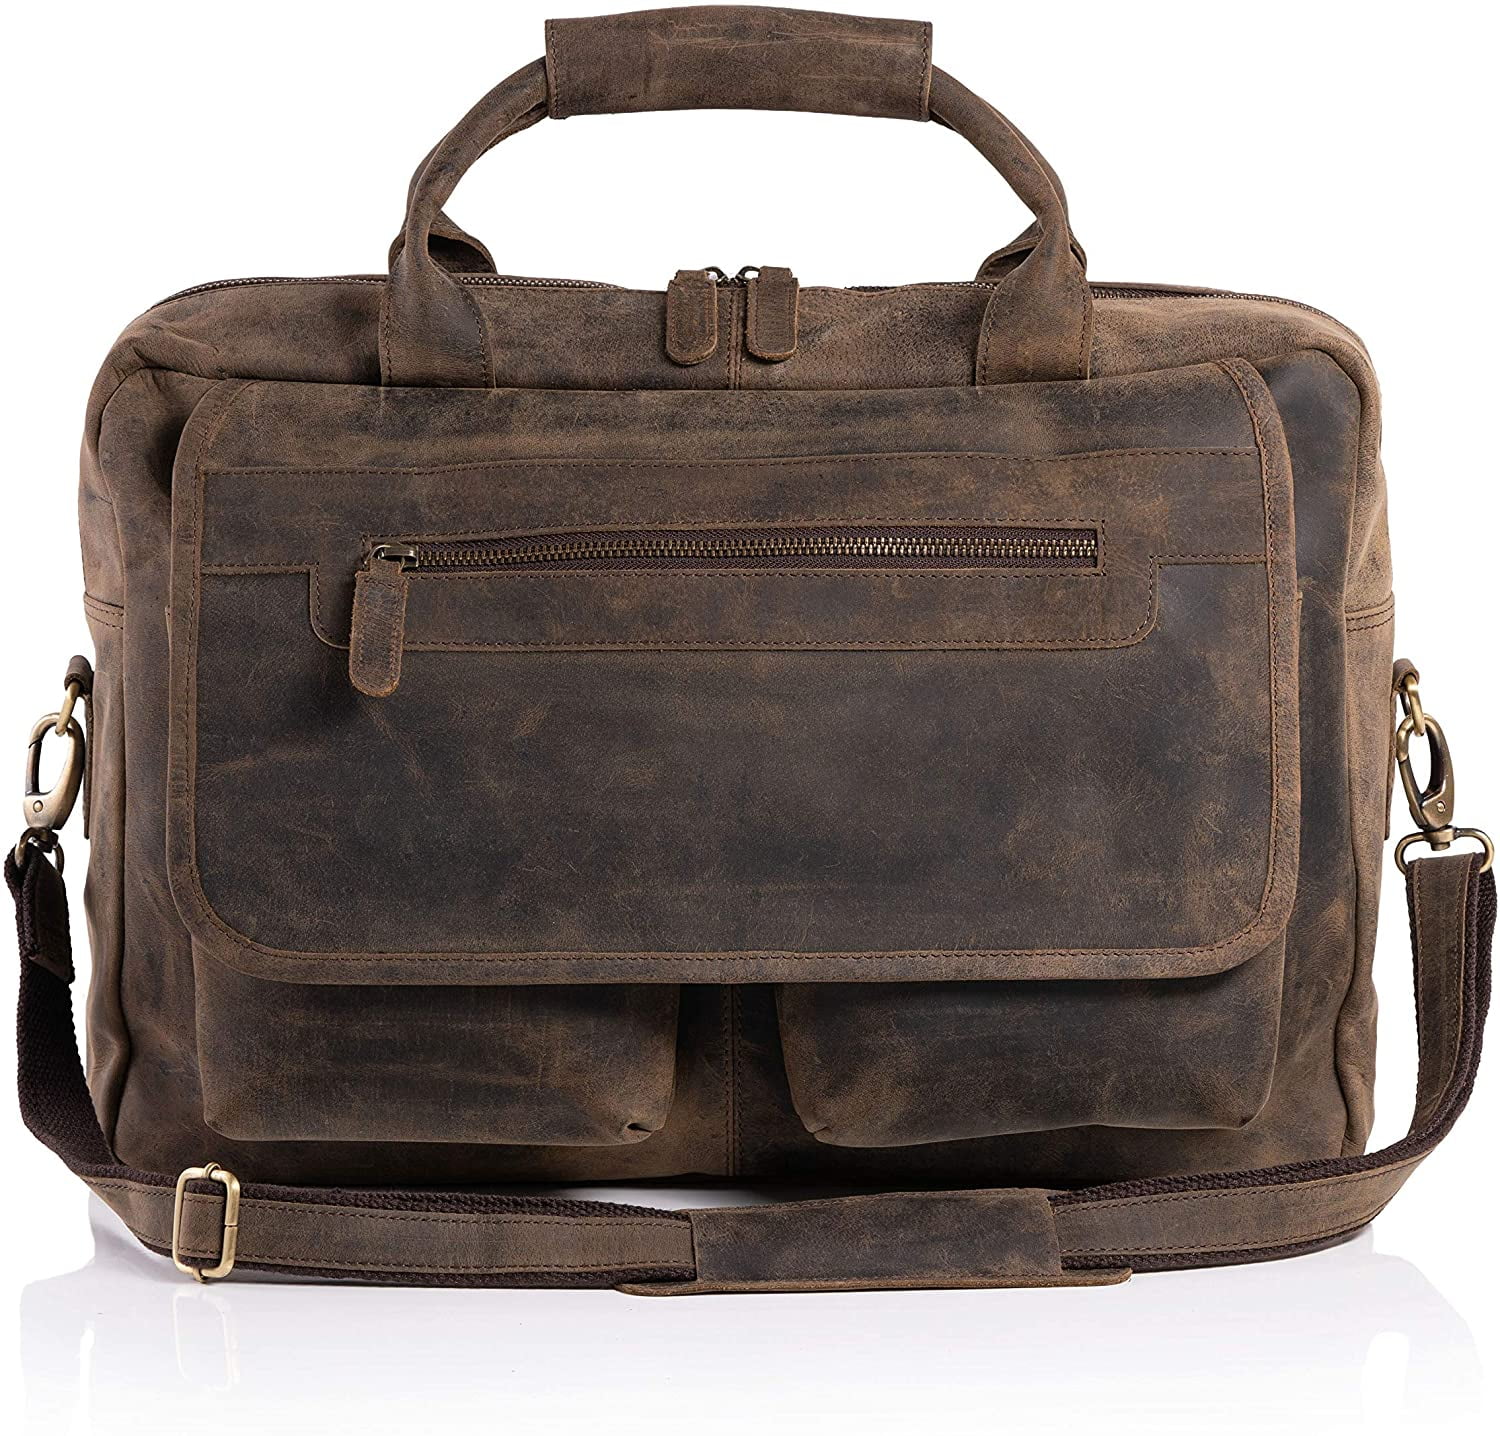 Vintage Leather Briefcase Messenger Bag for Men with Padded Protection Fits 15.6 Inch Laptop 